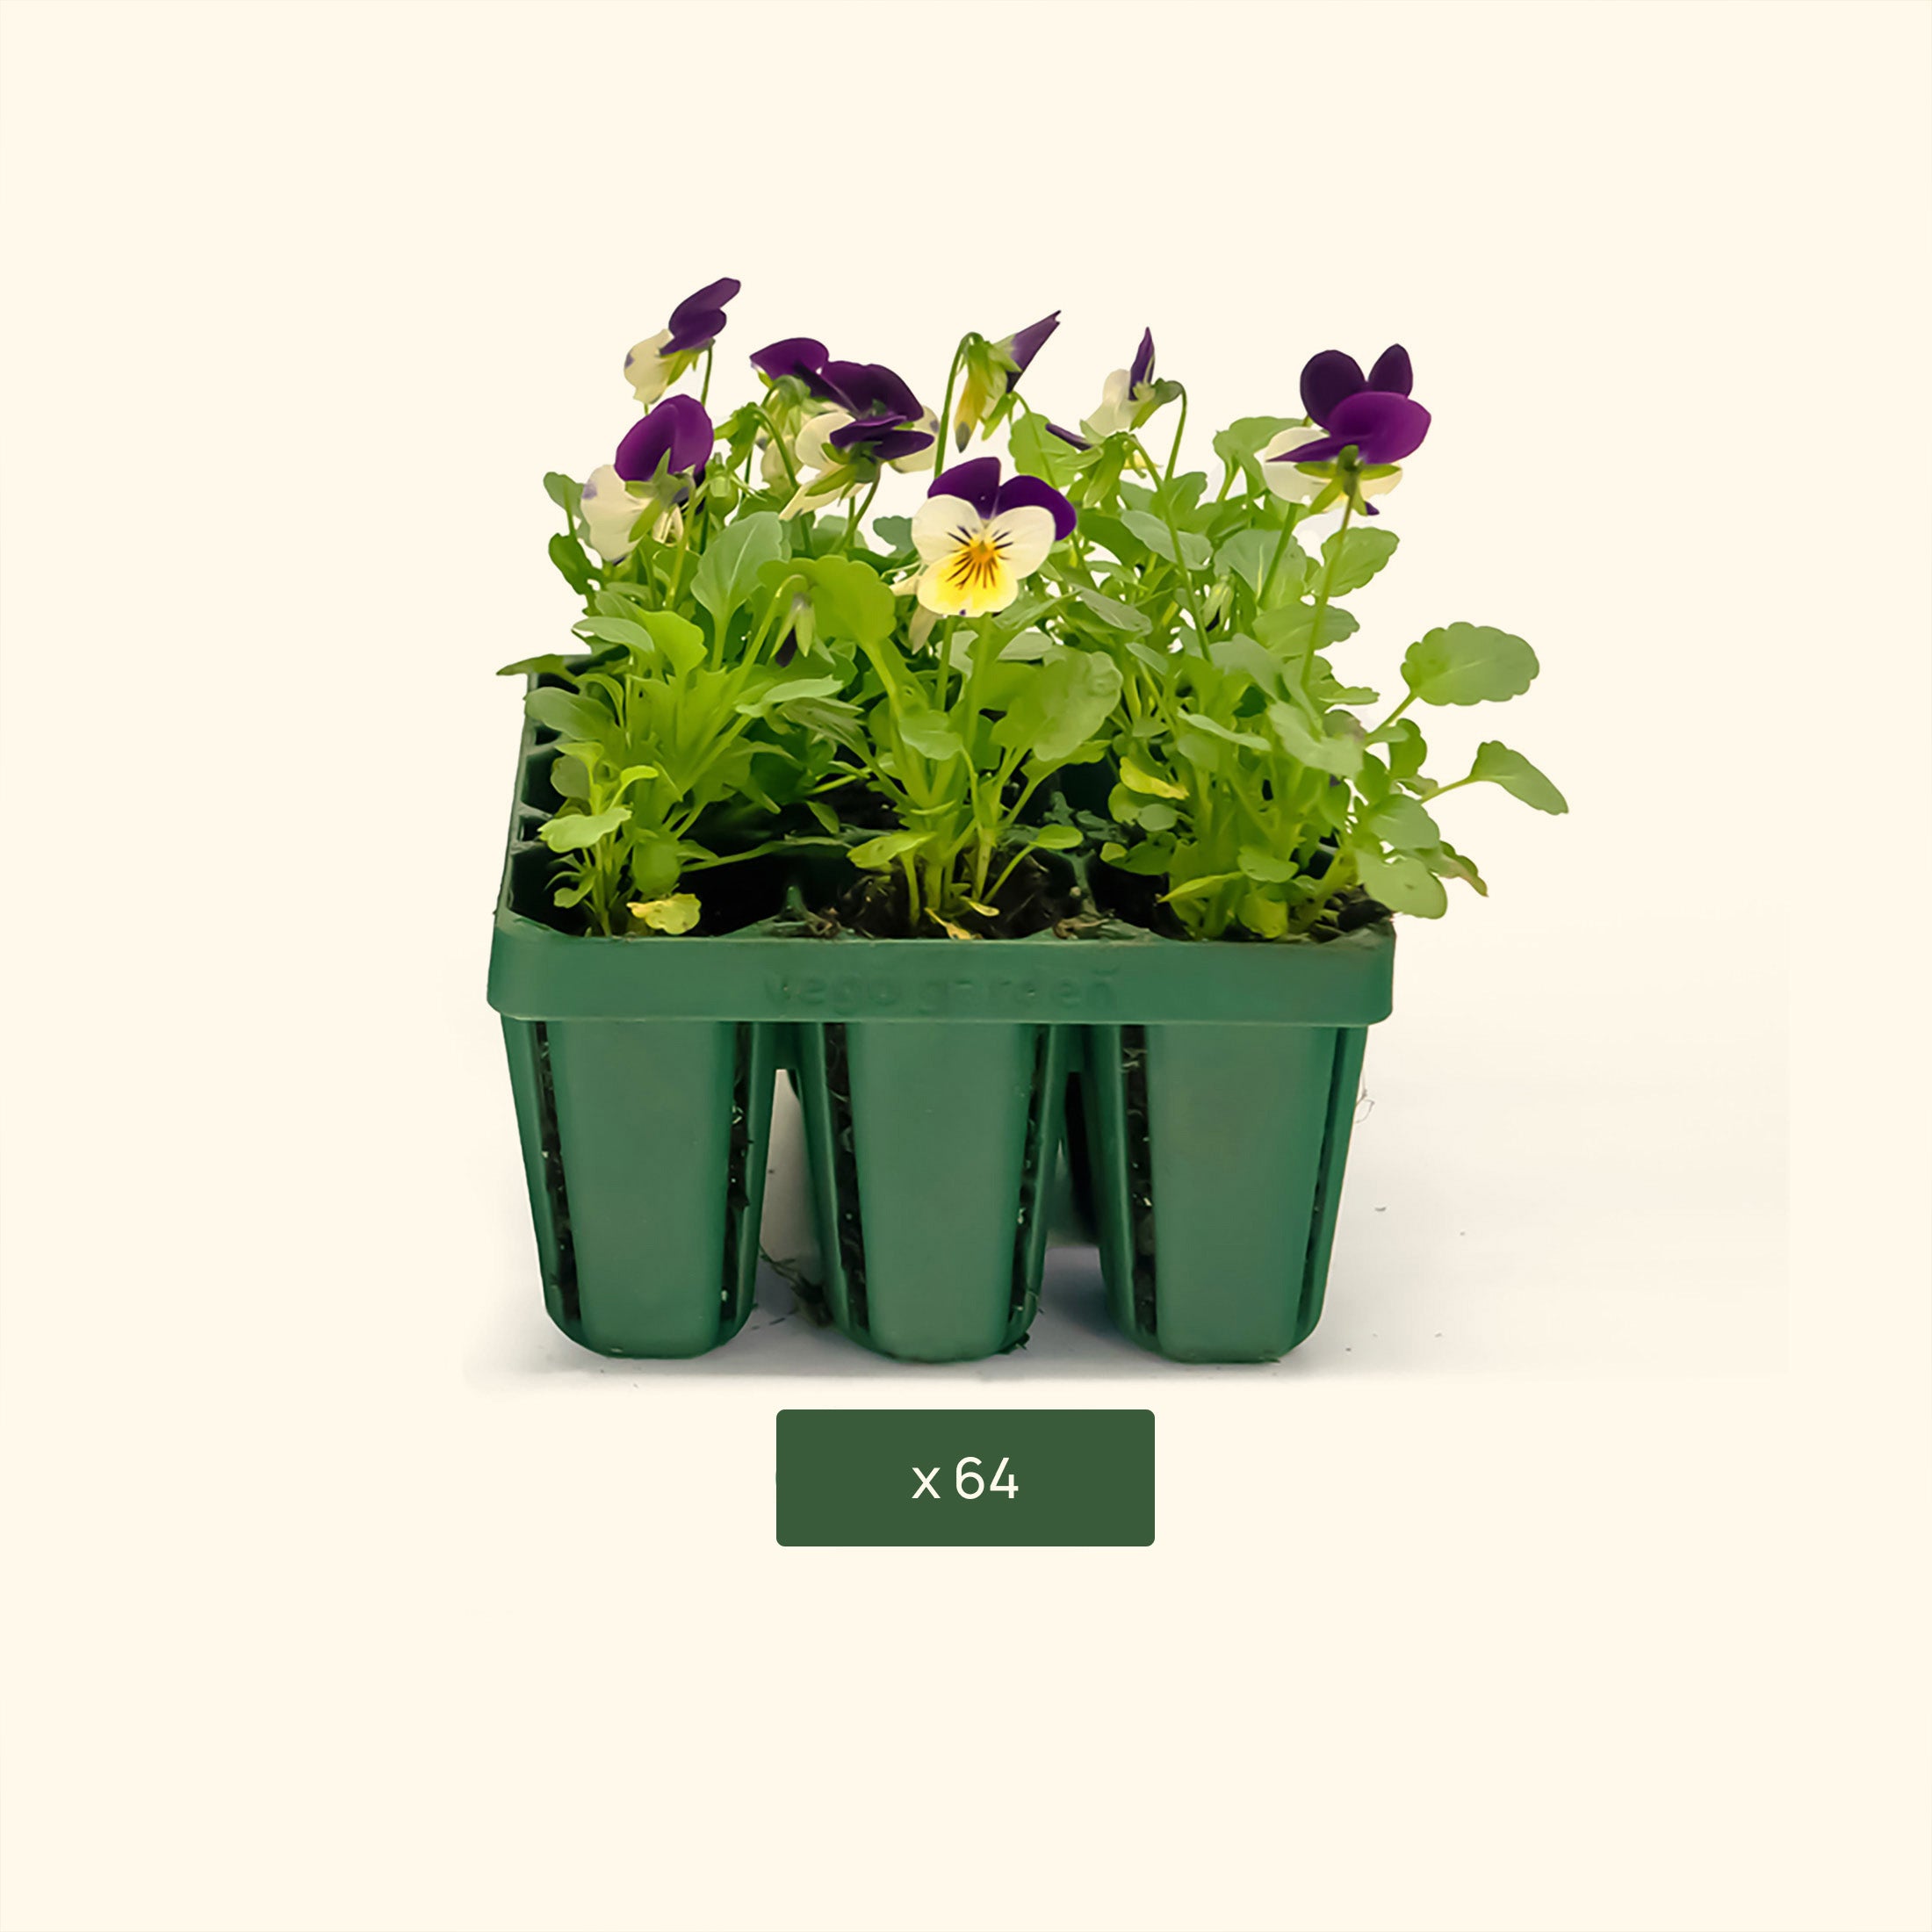 Vego Garden | Seedling Trays with Drip Irrigation & Air Pruning Strips - 64 Pack